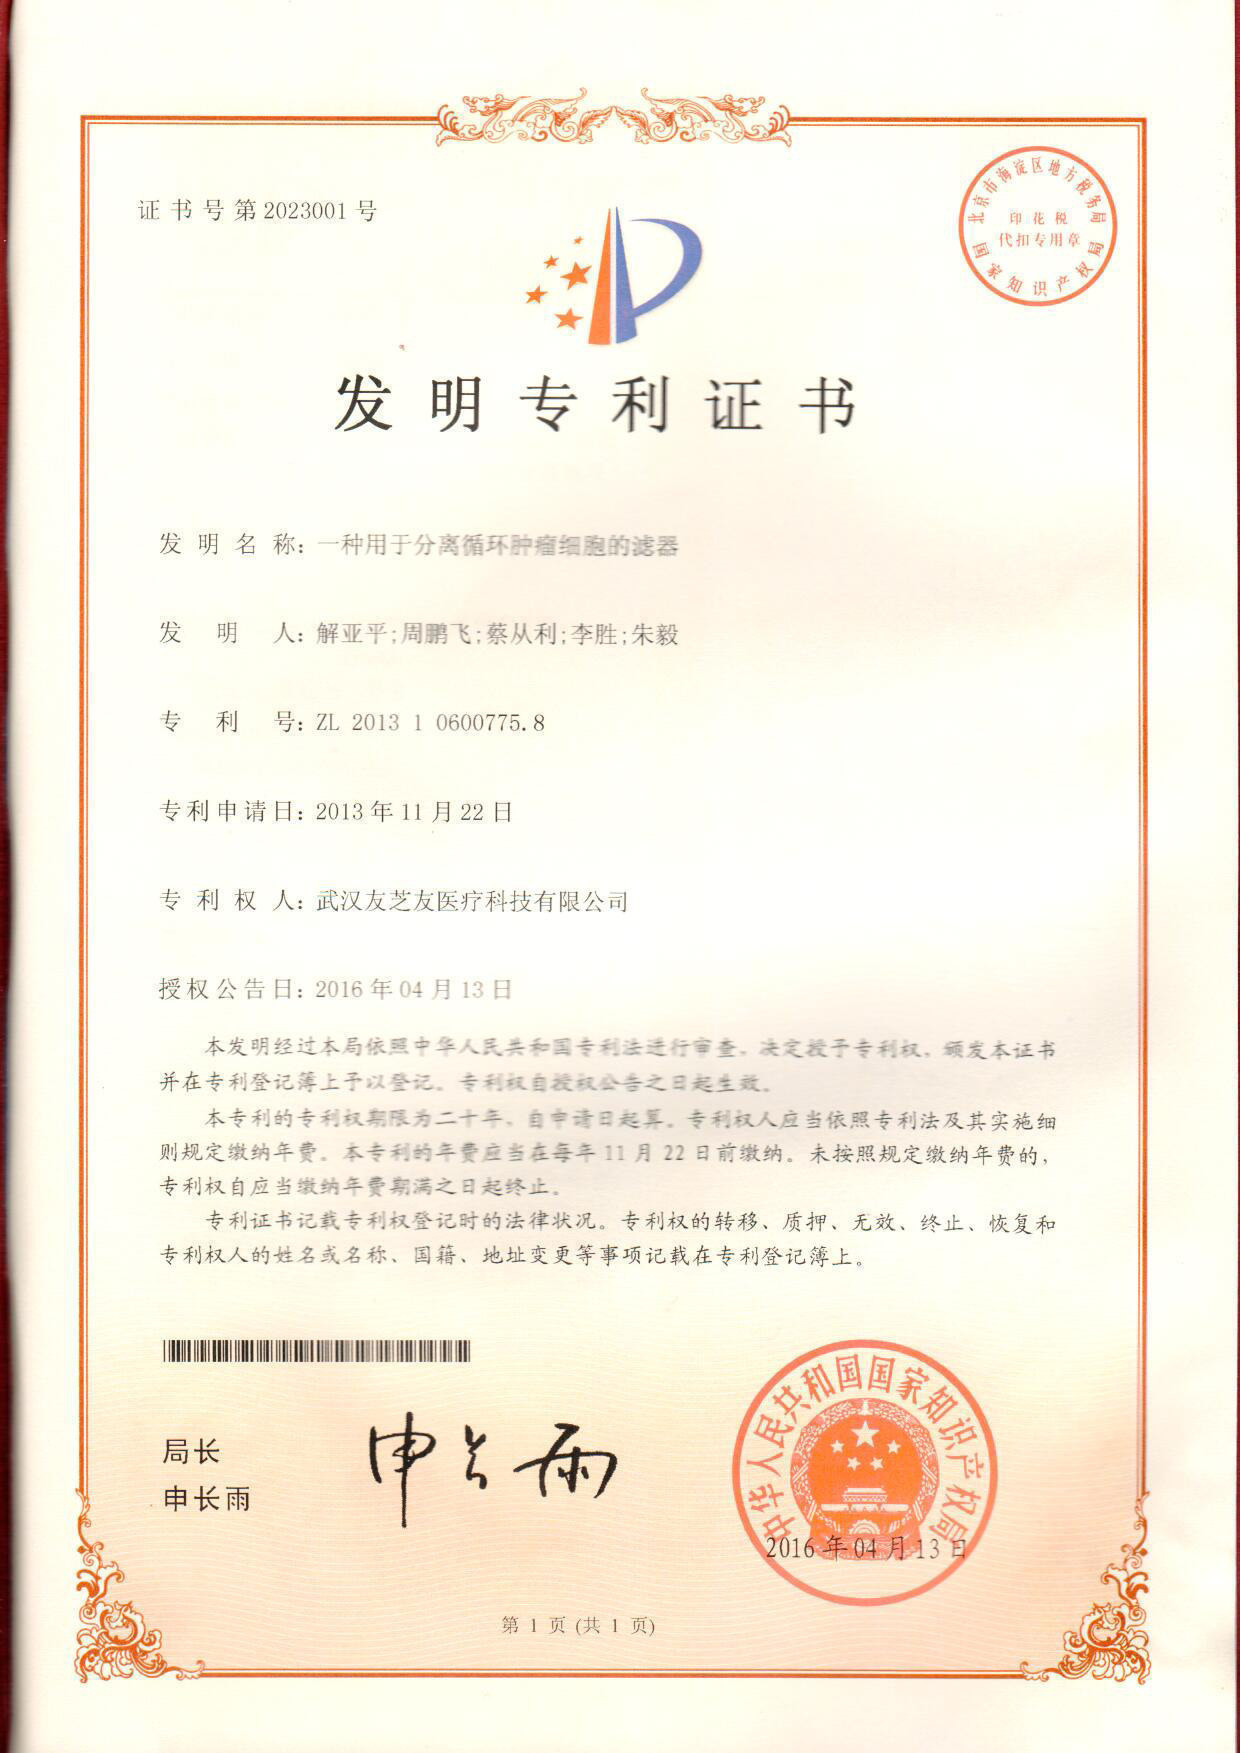 Patent Certificate for Invention of Filter